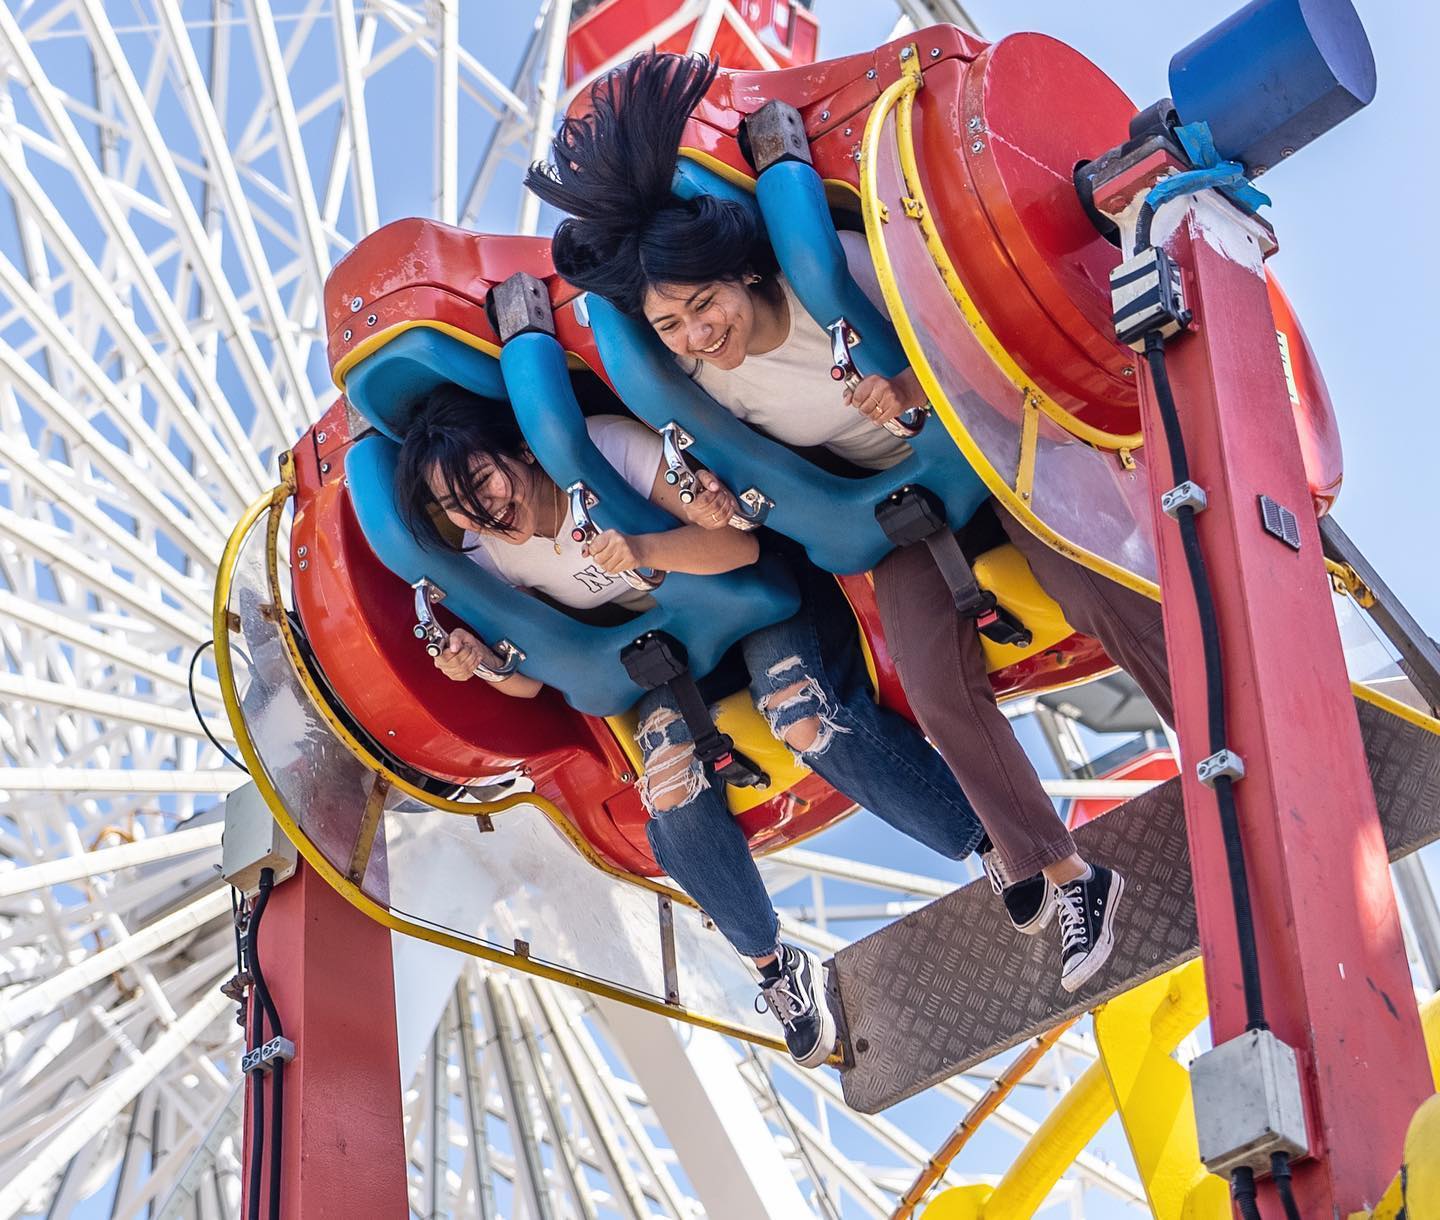 #FunFactFriday: Gyro Loop is the Park’s only Attraction – it’s like a ride, but you can win a prize!🤩  Spin to win in these two-seat, 360-degree-turning and tumbling attractions. Players use a joystick to control their speed and rpm all while flinging in circles, rotating frontward, backward and all around in what feels like a freefalling yet fun-wheeling, swing-like manner in an attempt to win a prize. 😵‍💫  📸: @vickiepynchon
- 
- 
- 
#santamonica #santamonicapier #pacpark #pacificpark #losangeles #adventuretime #actionphotography #california #seesantamonica #discoverlosangeles #discoverla #losangeleslife #fridayfeeling #fridayvibes